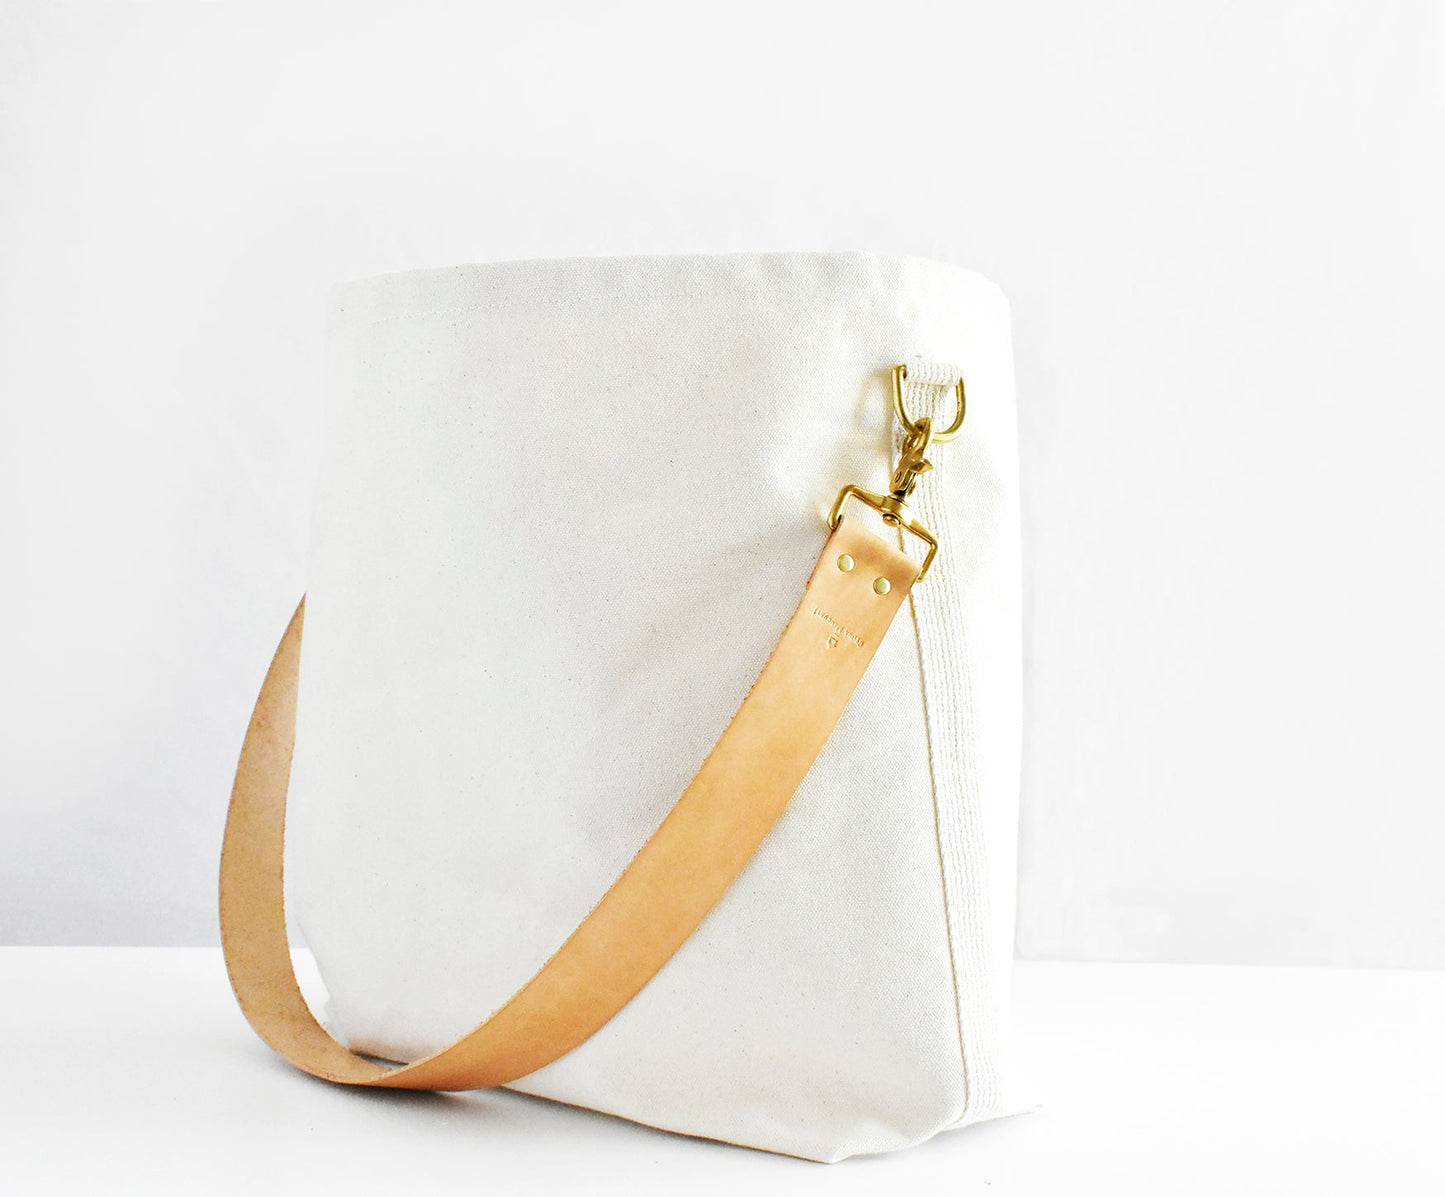 Tote Bag with Leather Strap - Tan